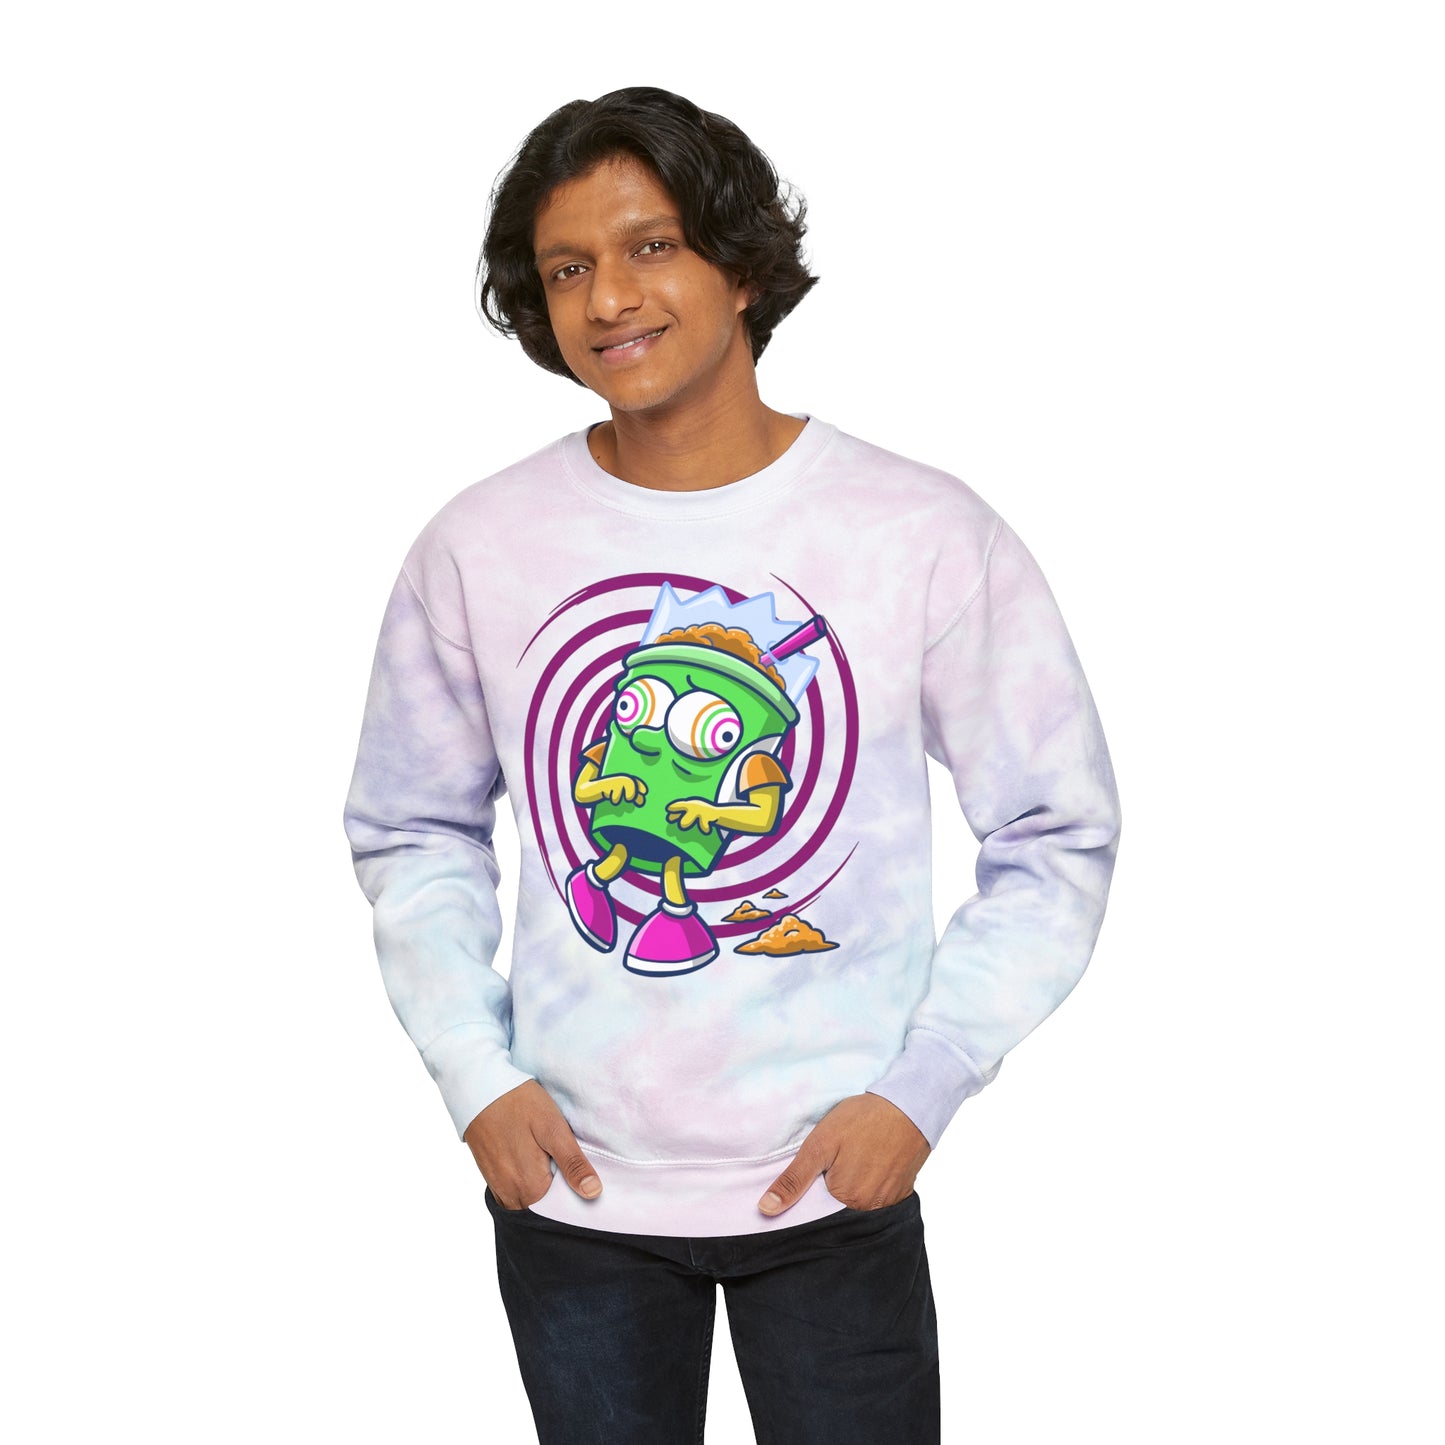 You Are What You Drink Squishee tie-dye sweatshirt